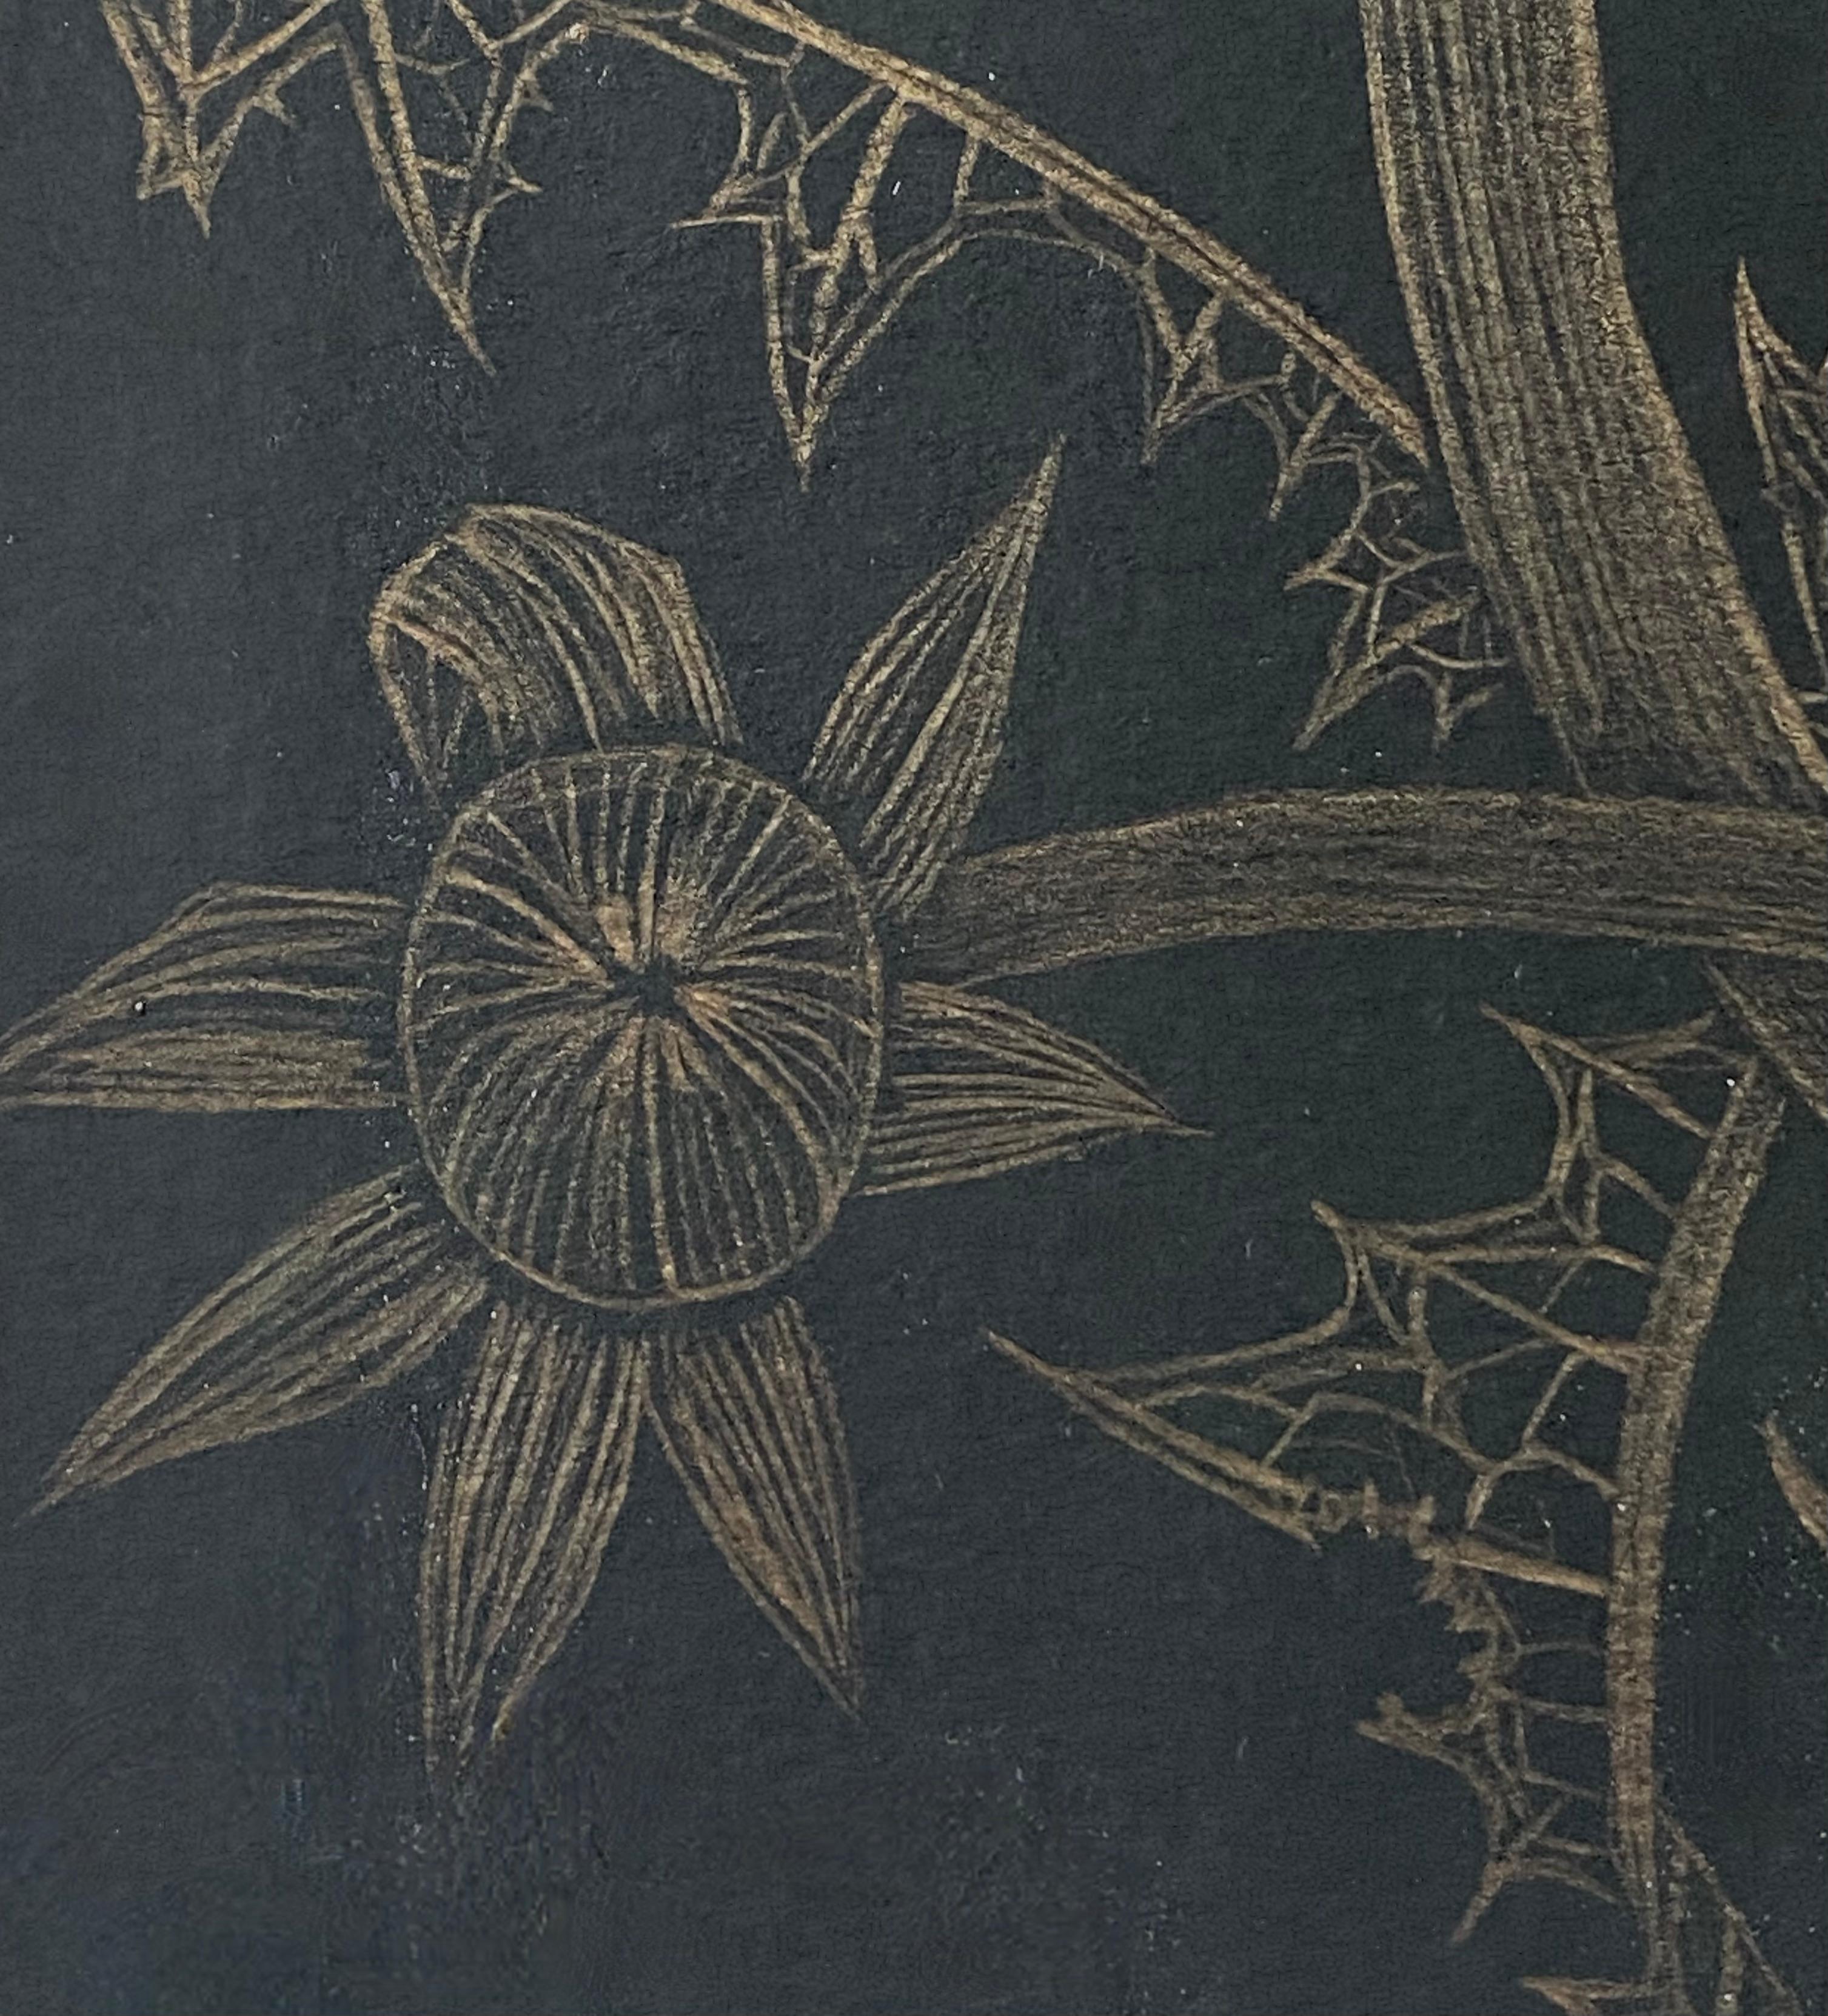 Dandelion with Two Buds, Botanical Drawing on Black Paper Made With 14K Gold 1